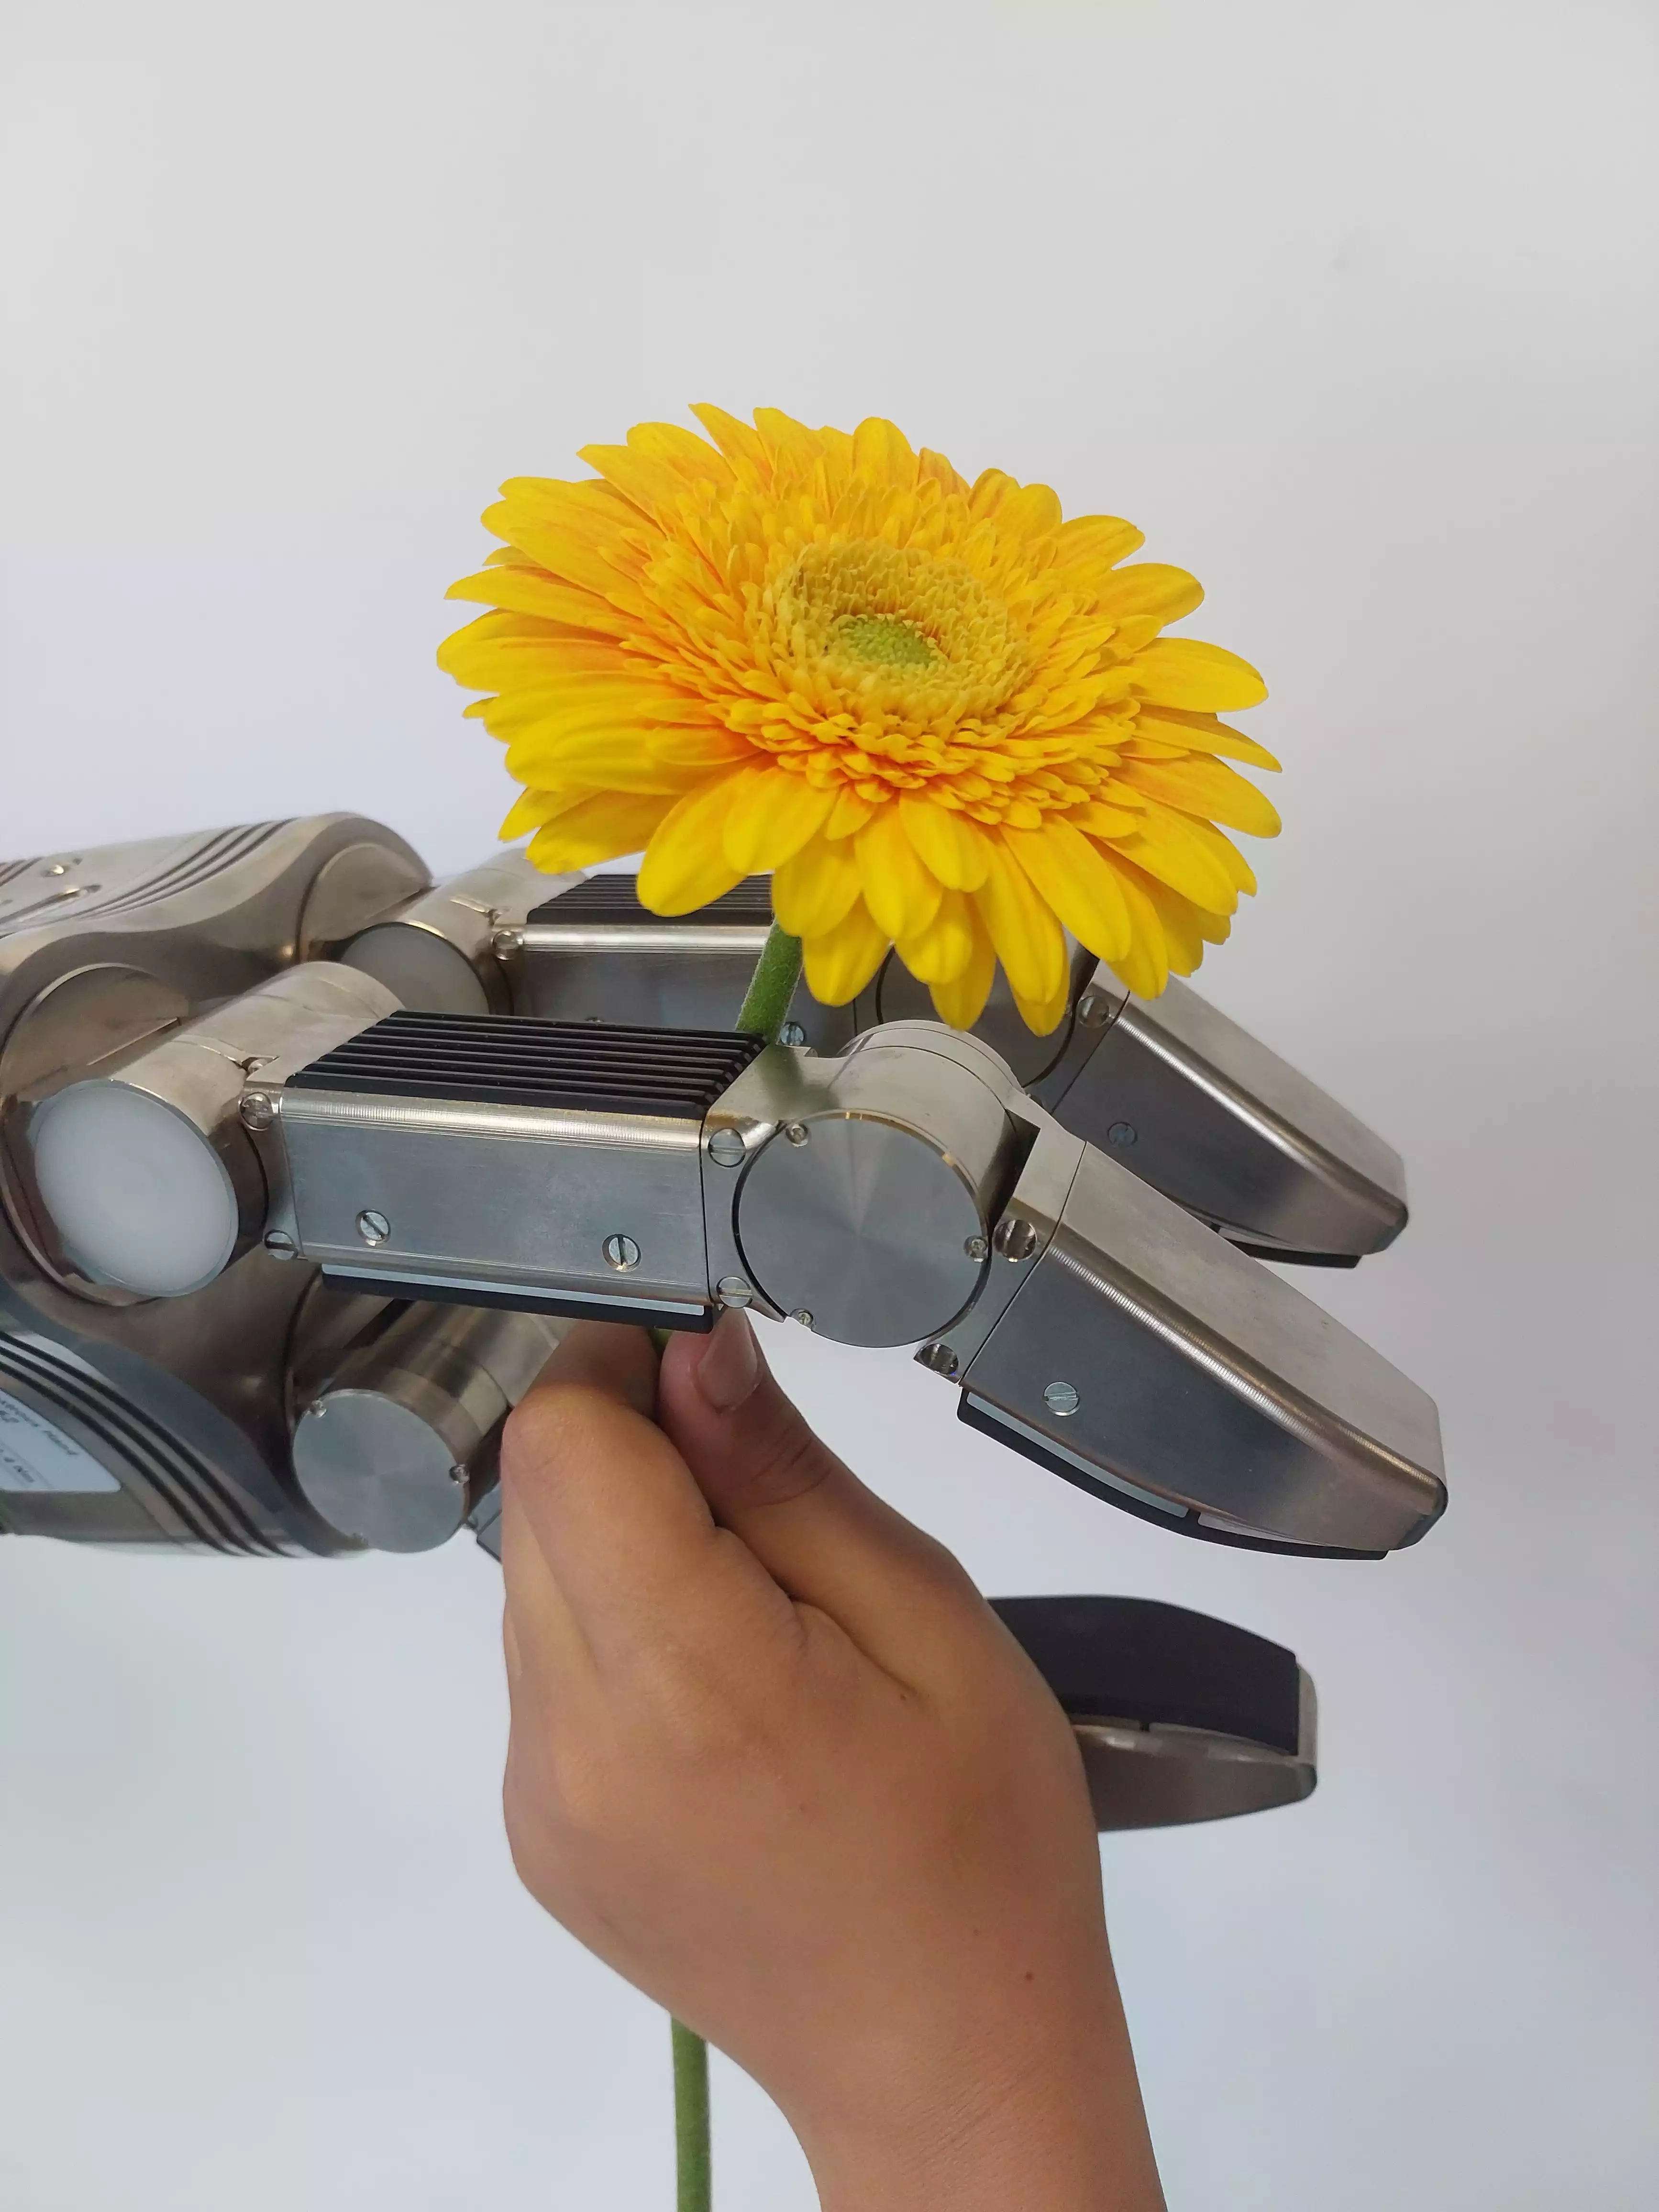 Human giving a flower into a robot's hand